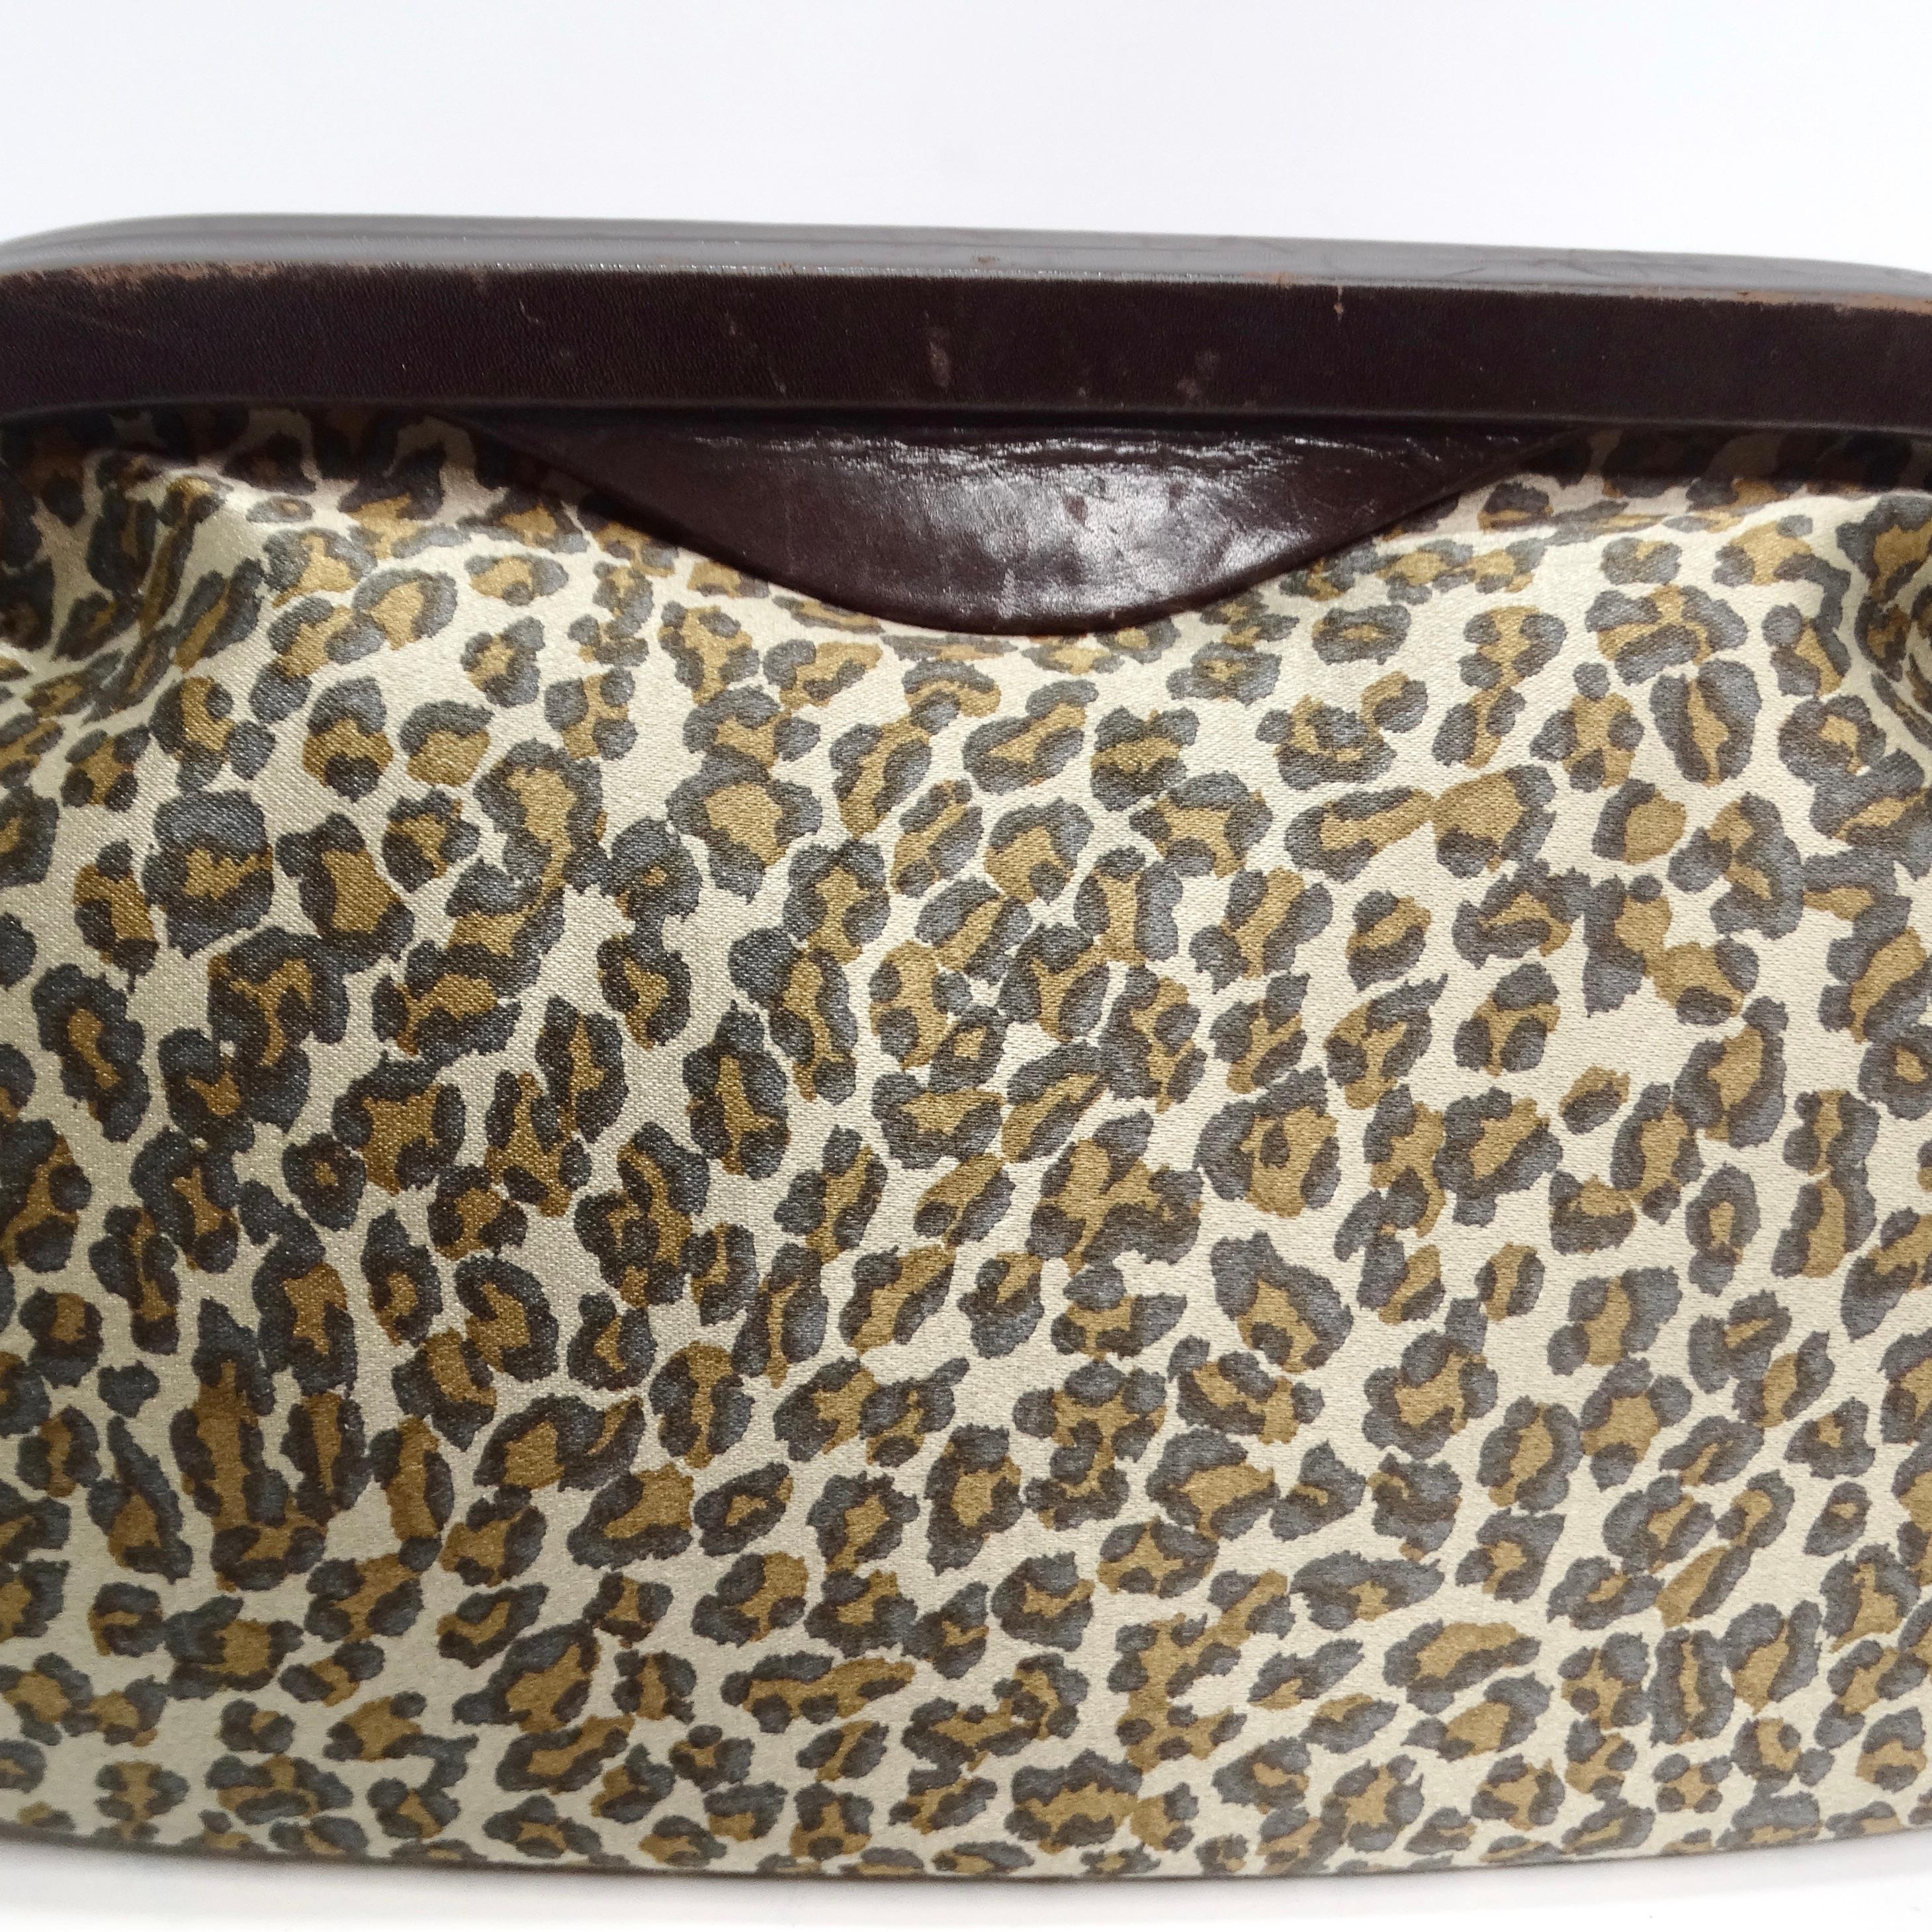 Introducing a clutch that's not just an accessory, but a work of art - the Bottega Veneta 1980s Leopard Print Satin Clutch. This classic mini clutch features a leopard print satin design, a brown wood magnetic closure, and a vibrant red leather